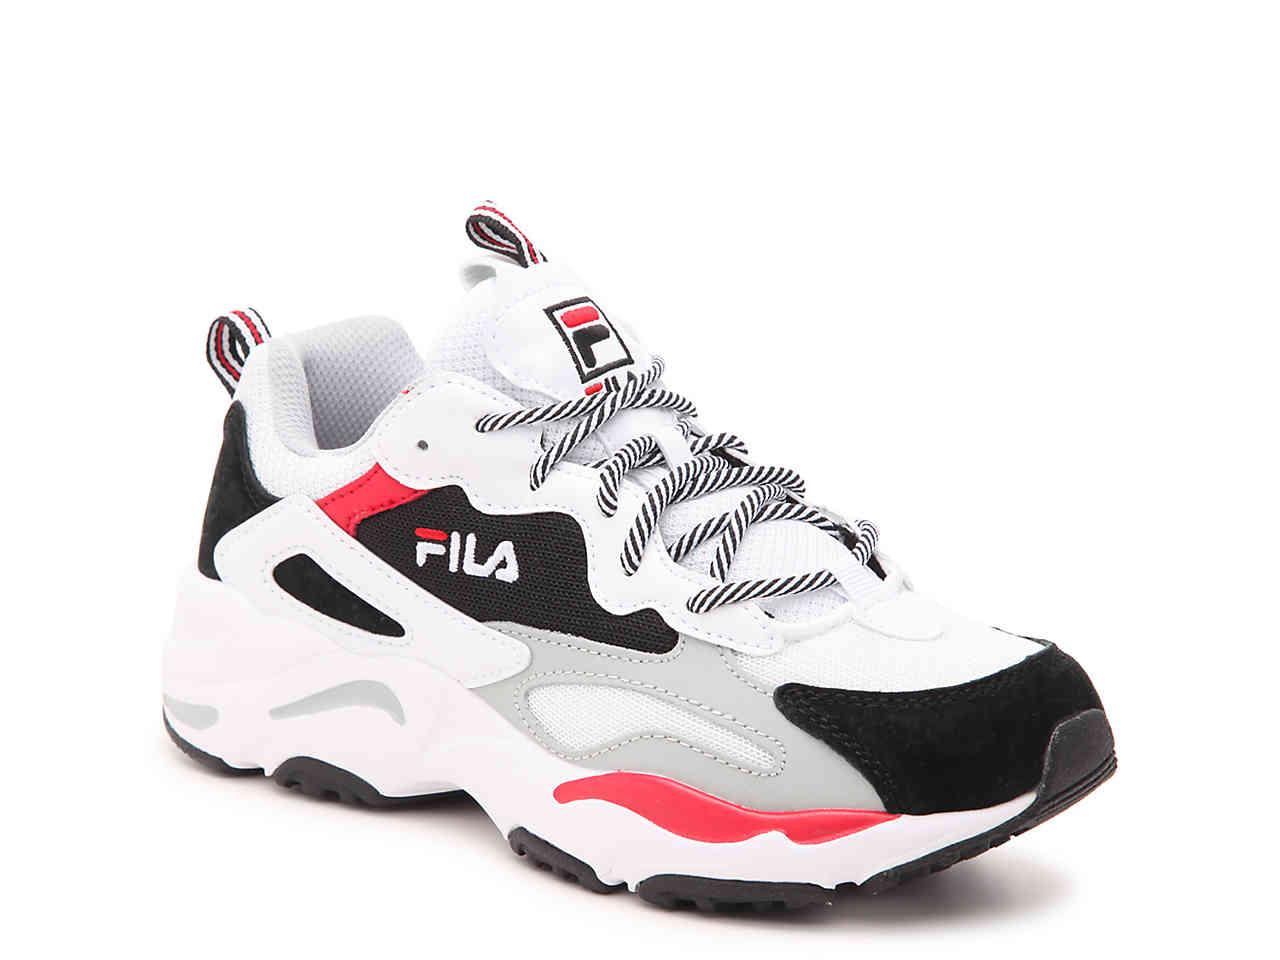 Fila Ray Tracer in Black/White/Red (White) | Lyst